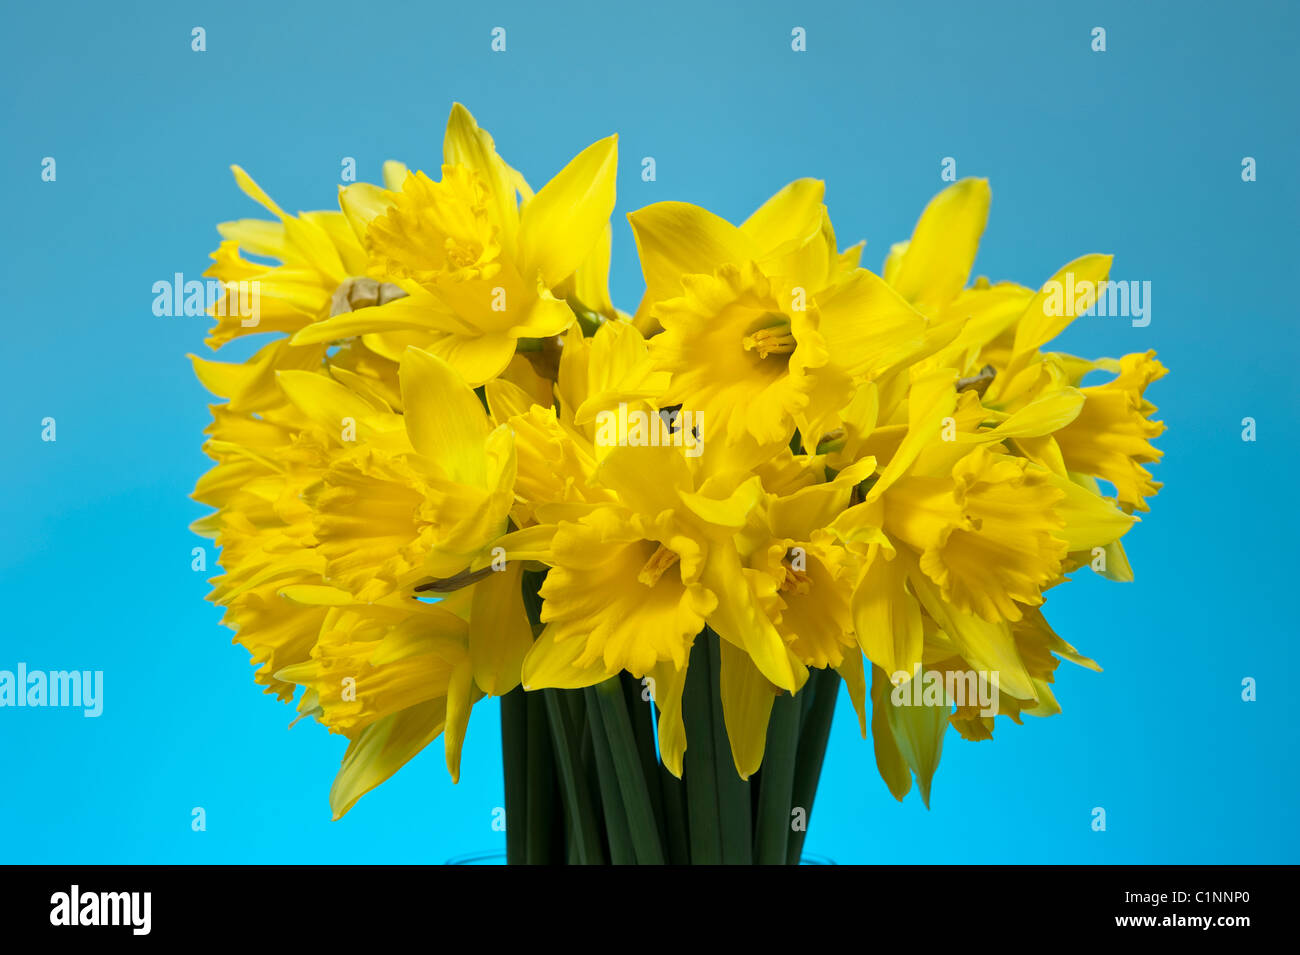 A bunch of spring daffodil flowers in a glass vase against a sky blue background Stock Photo